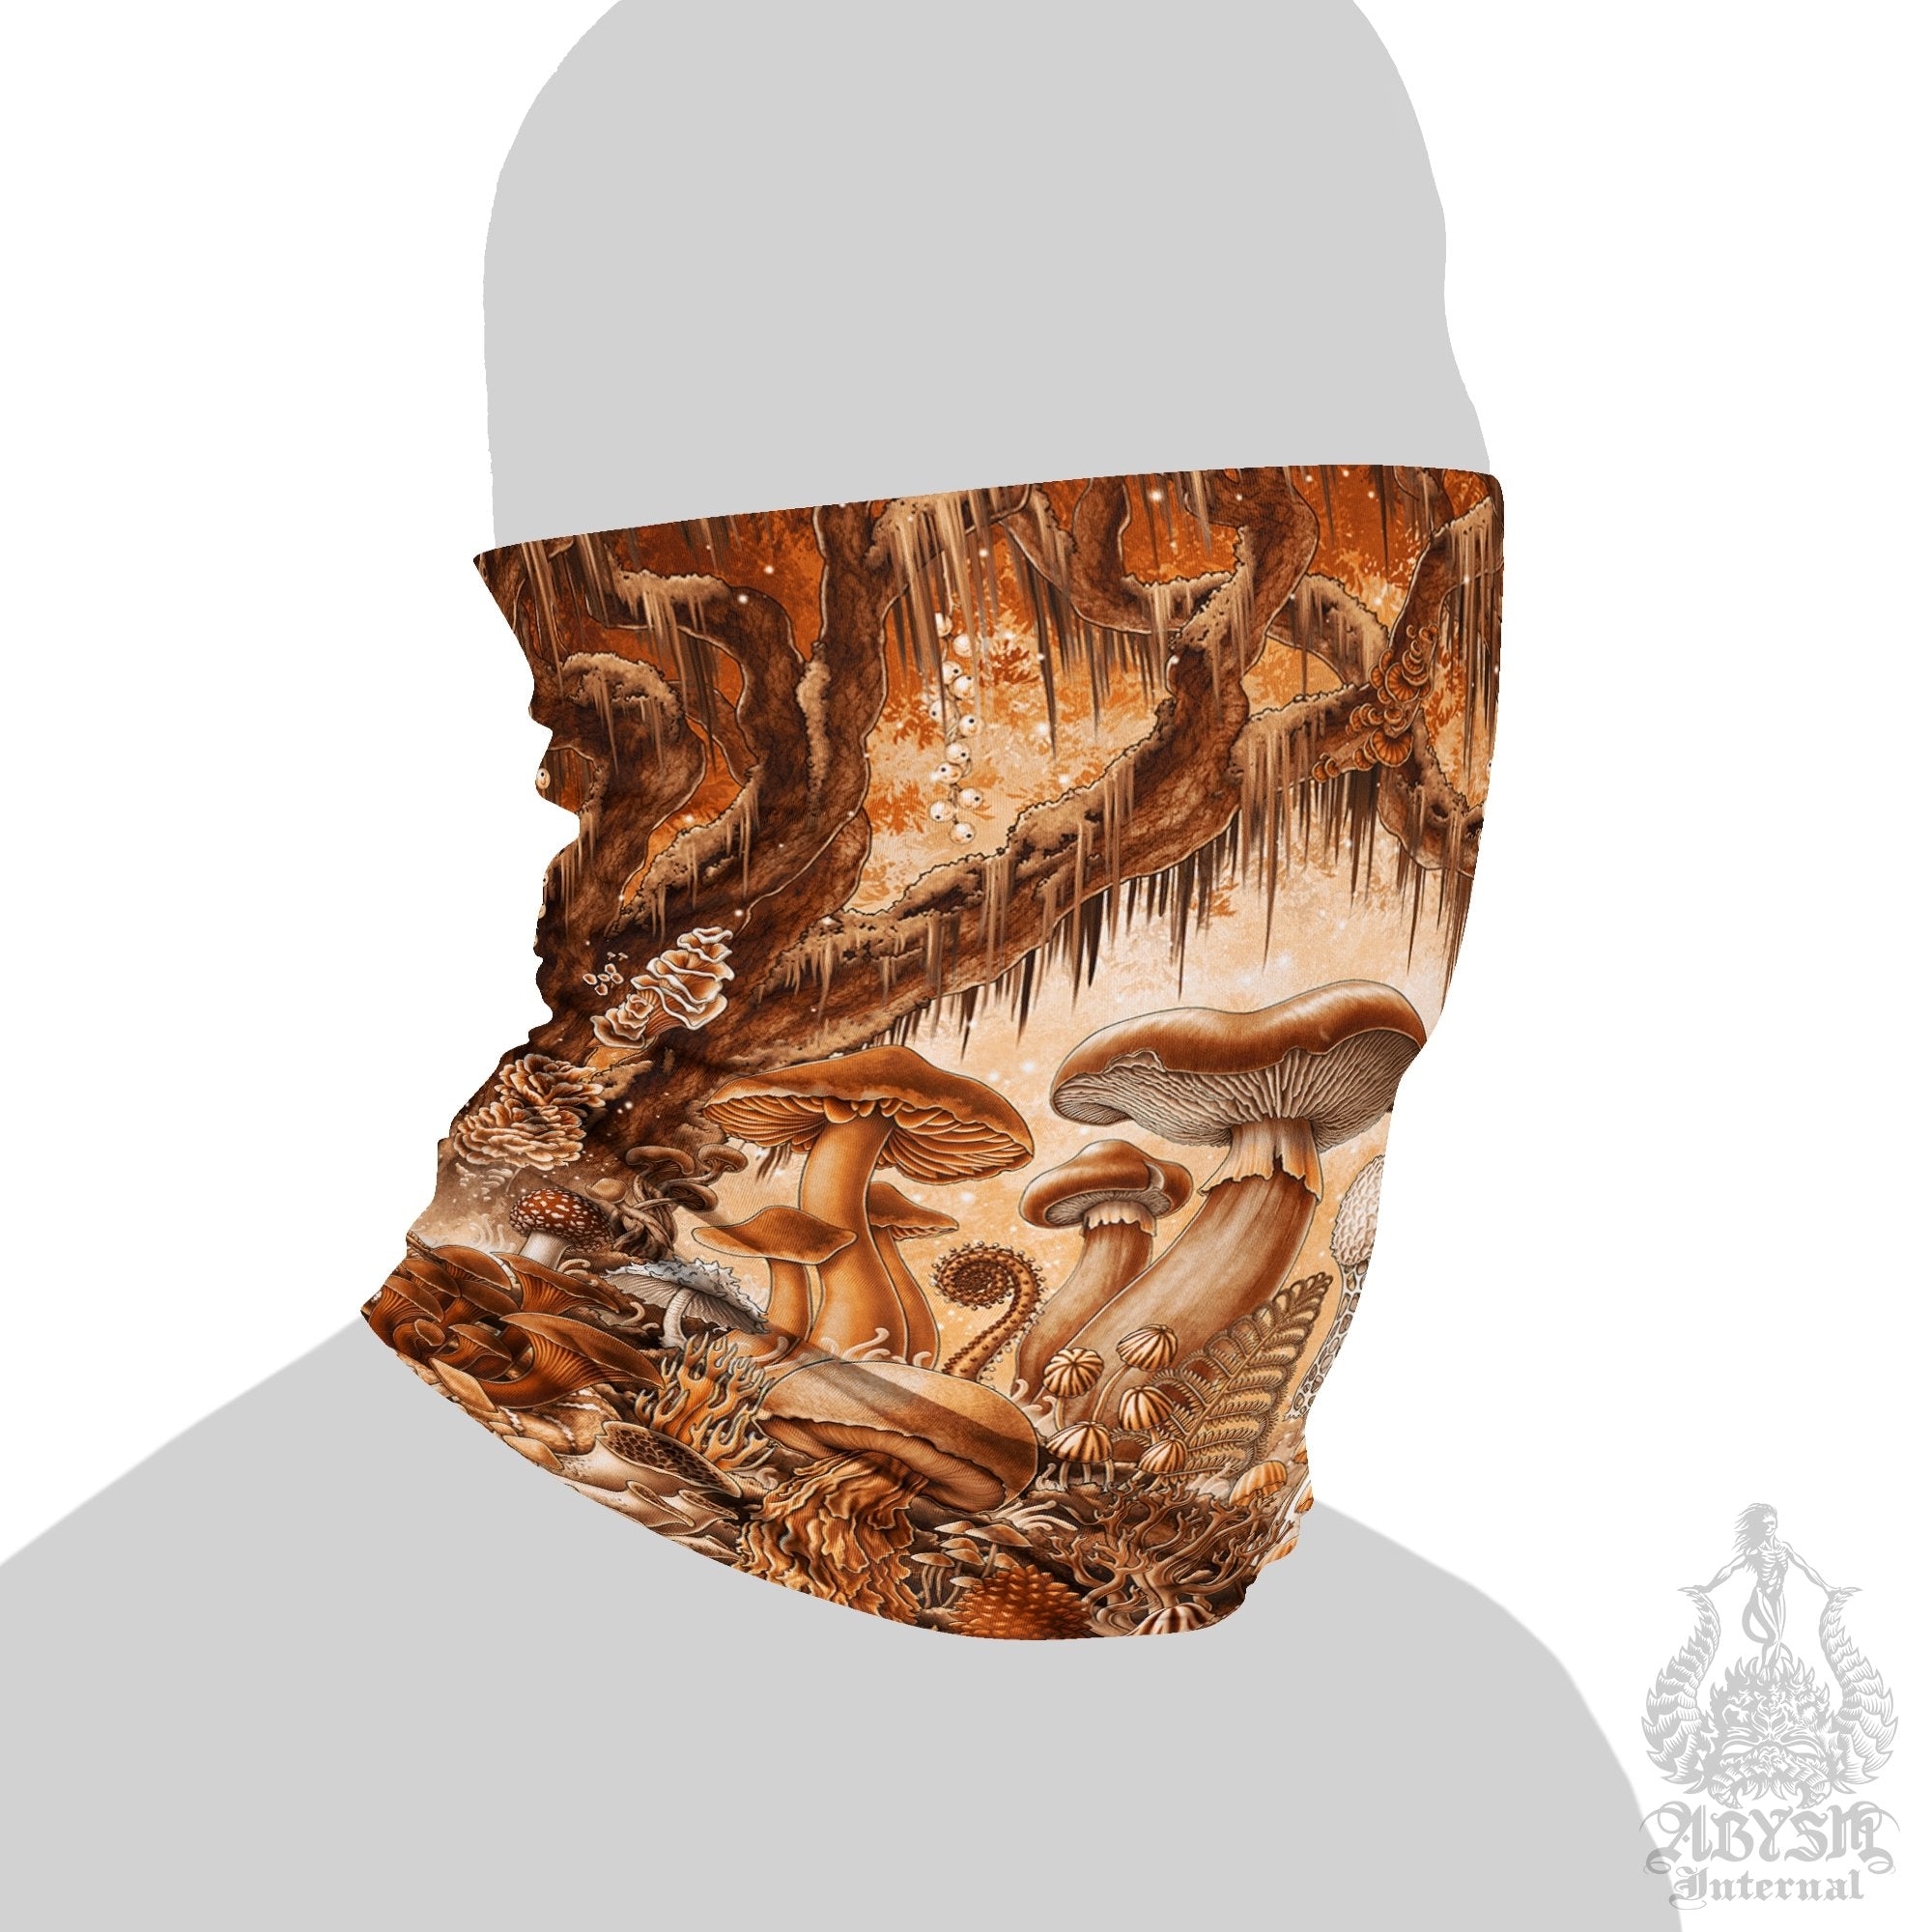 Mushrooms Neck Gaiter, Face Mask, Head Covering, Magic Shrooms Art, Indie Festival Outfit, Mycologyst Gift - Cream - Abysm Internal